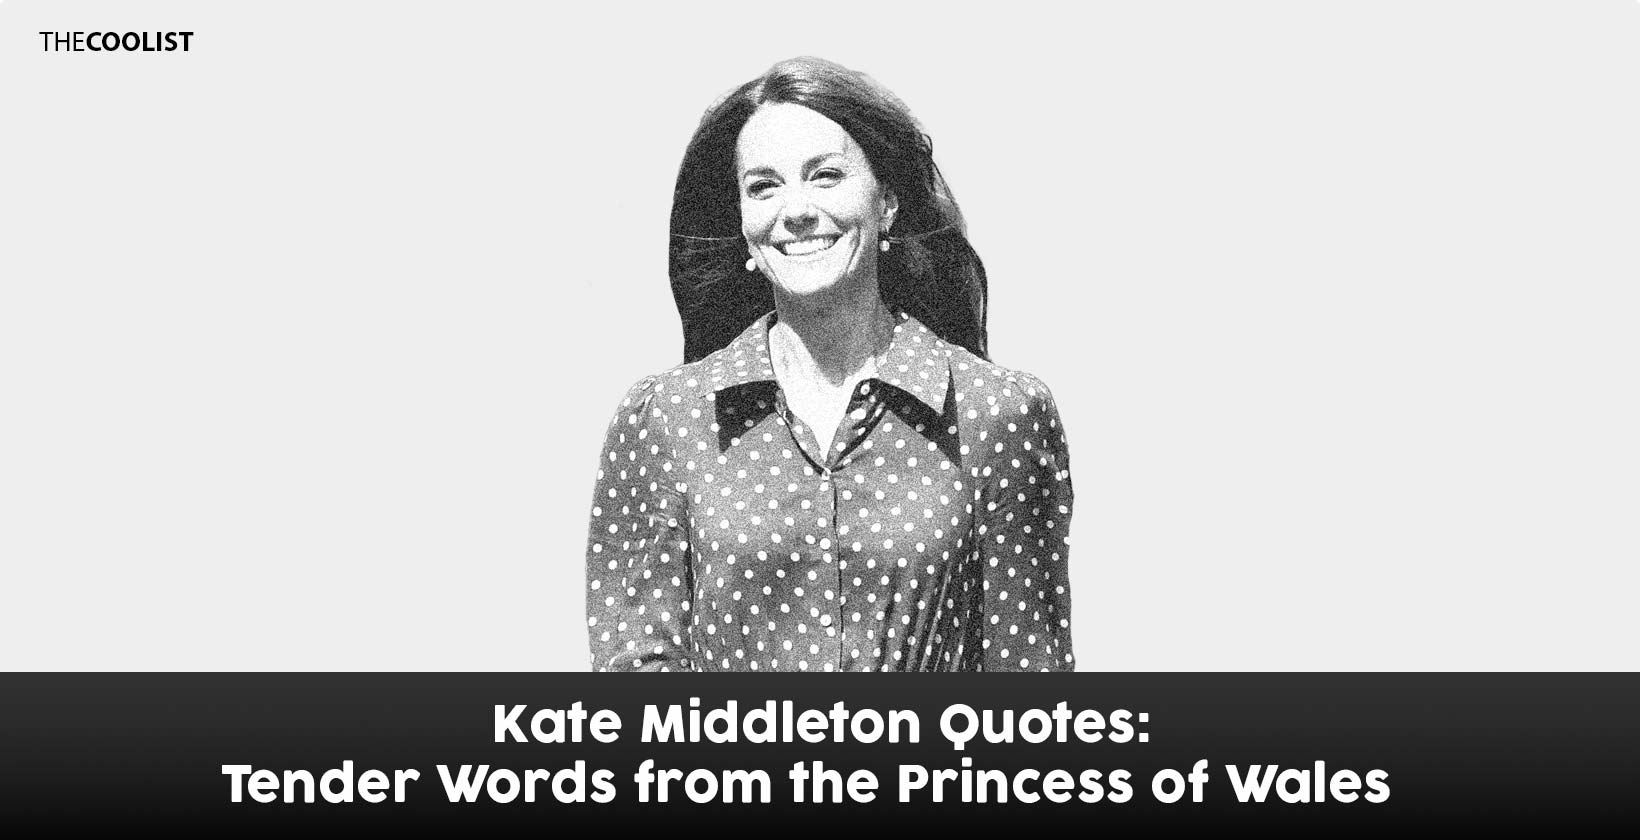 Famous Quotes from Kate Middleton